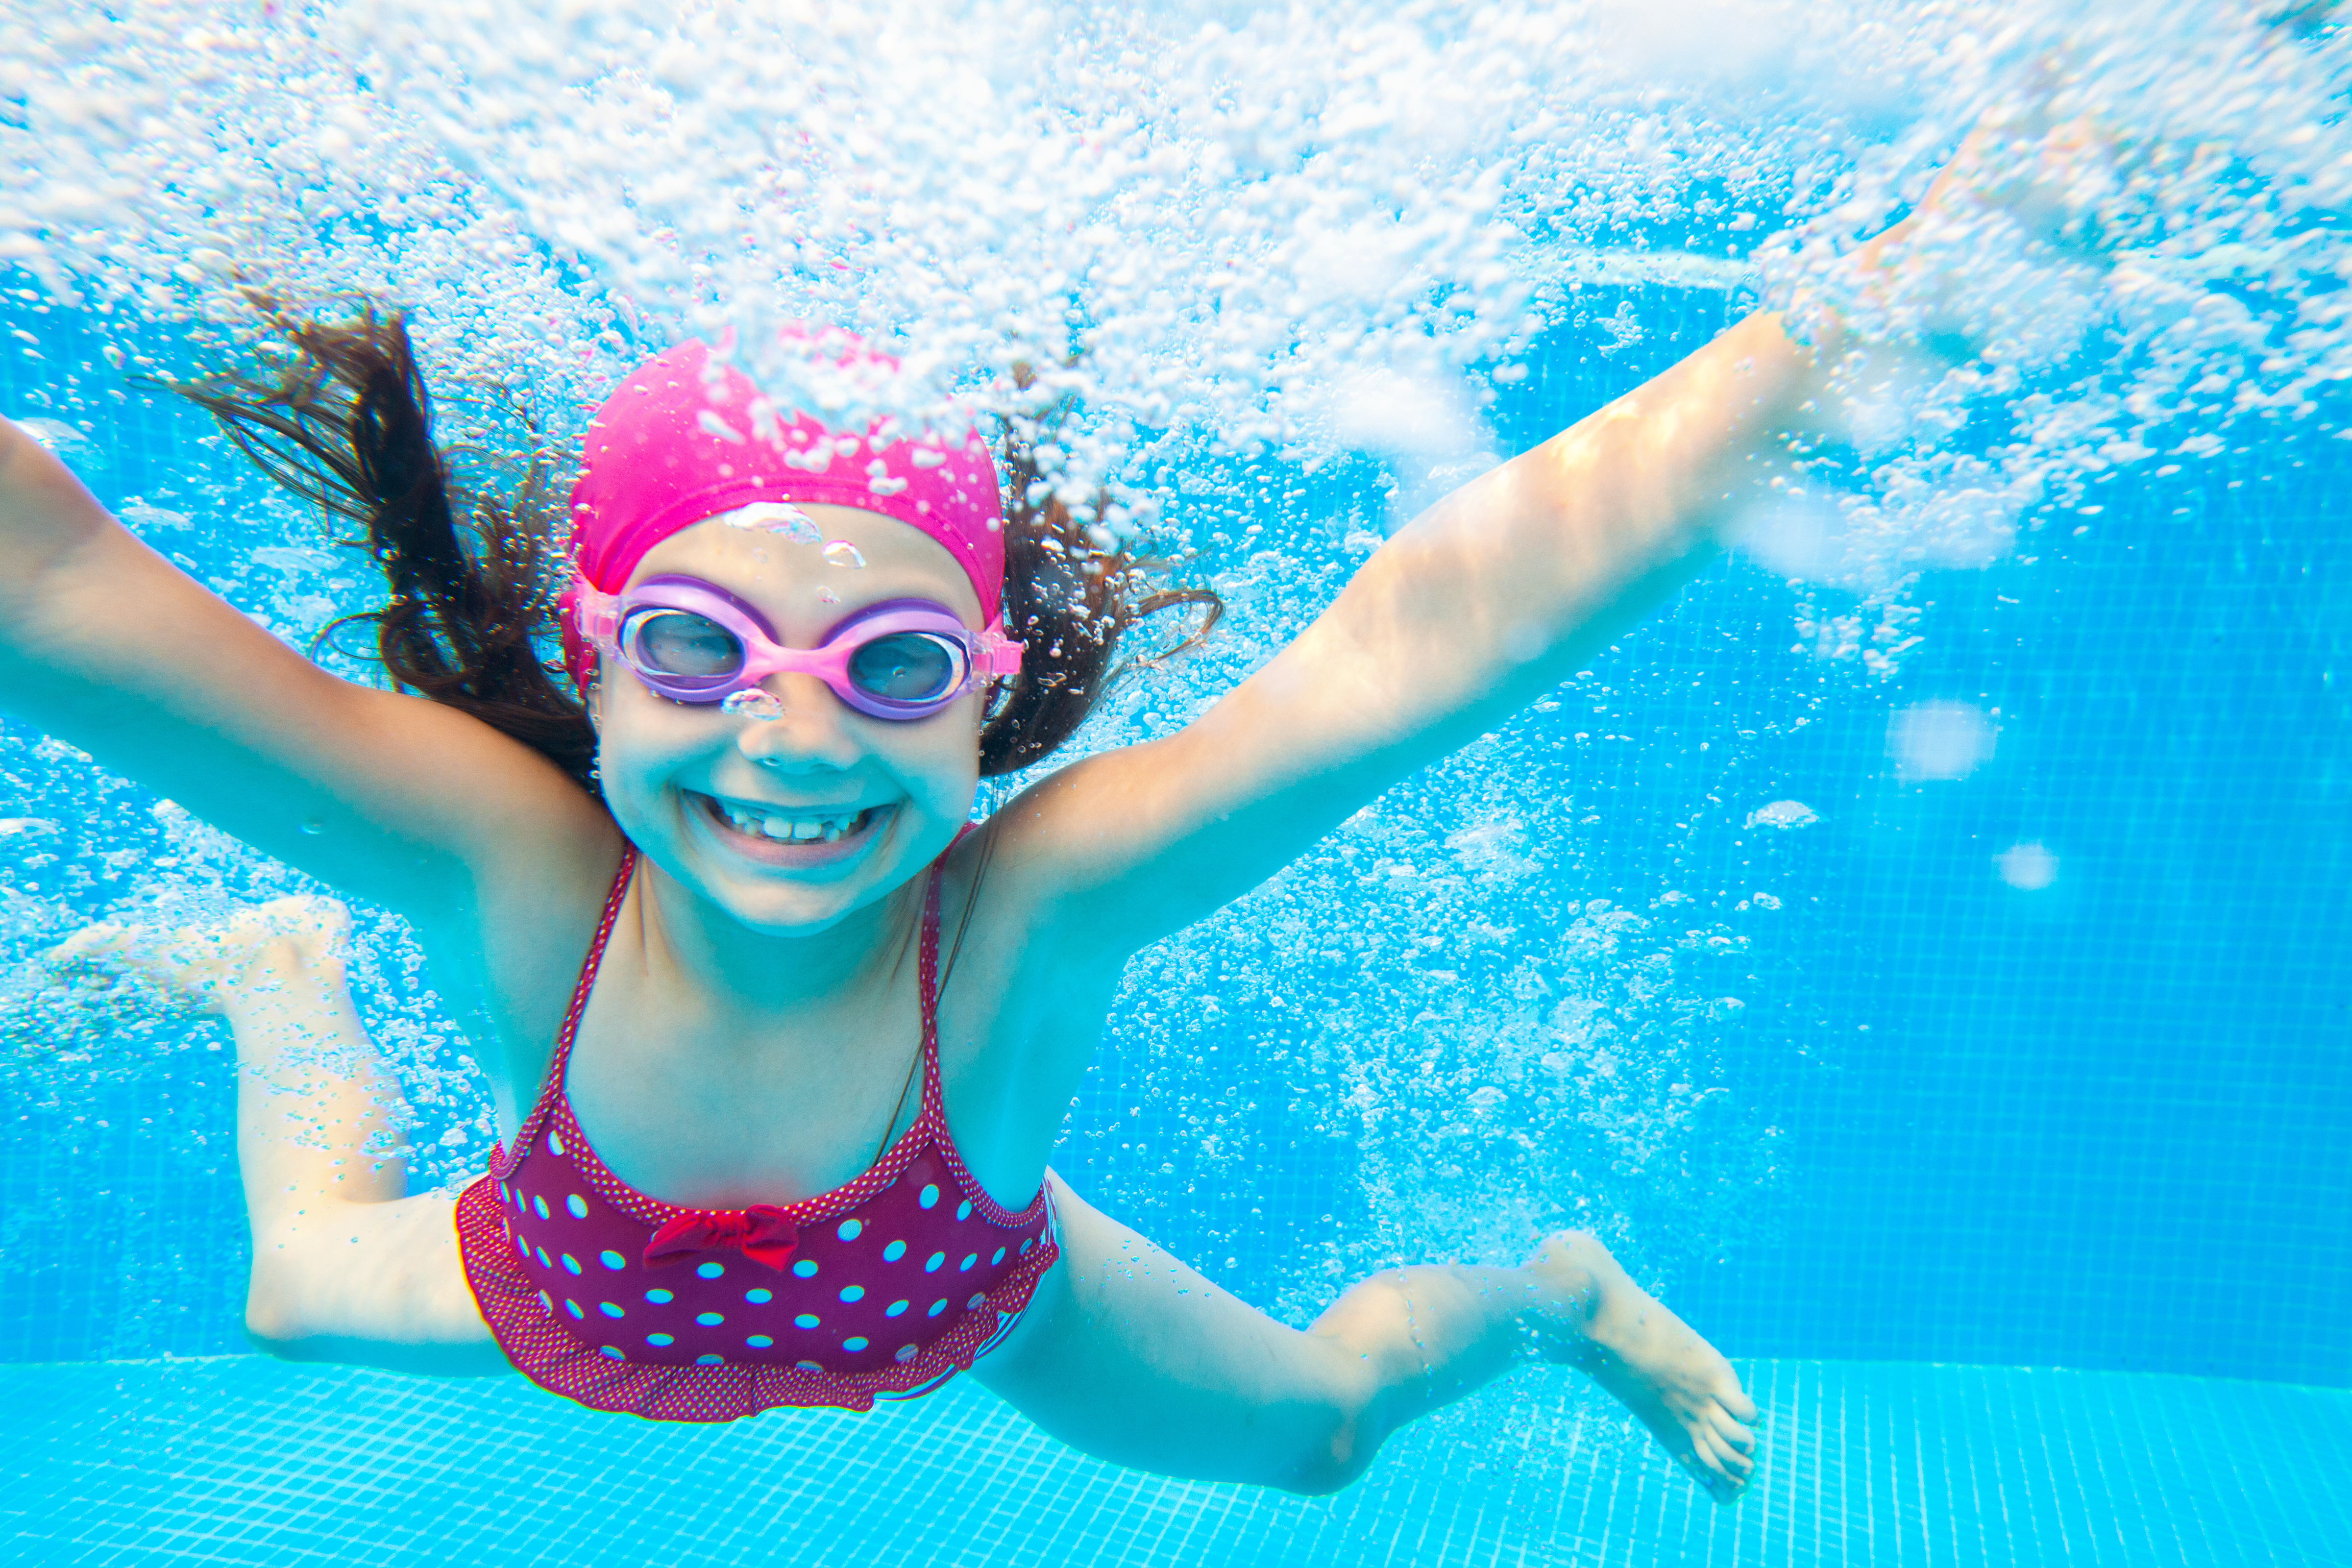 Image showing a girl underwater, smiling at the camera, wearing a pink swimming costume and swimming cap.